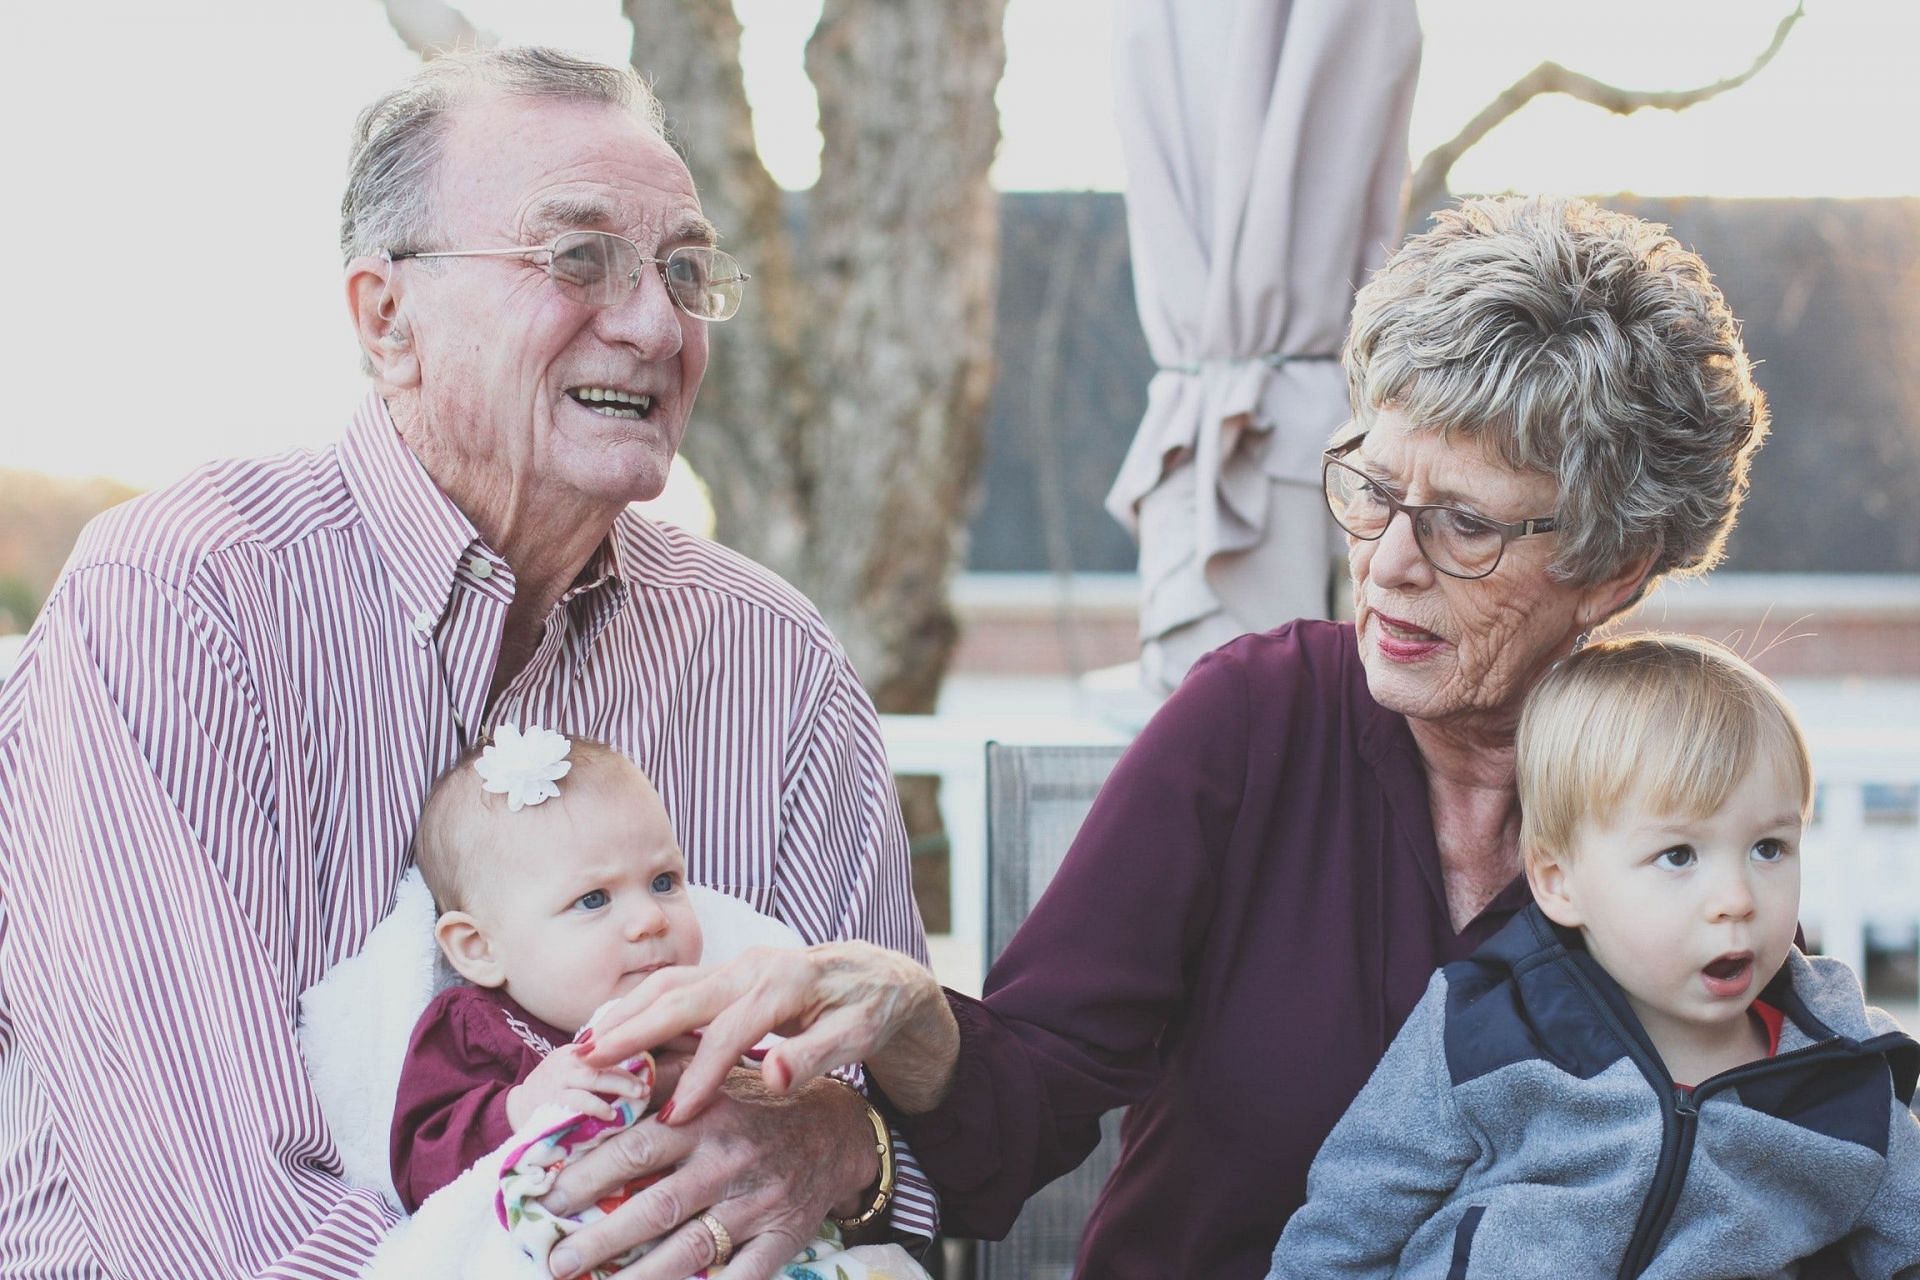 The life of boomers has been as complex as any generation. (Image via Pexels/ Kampus Production)